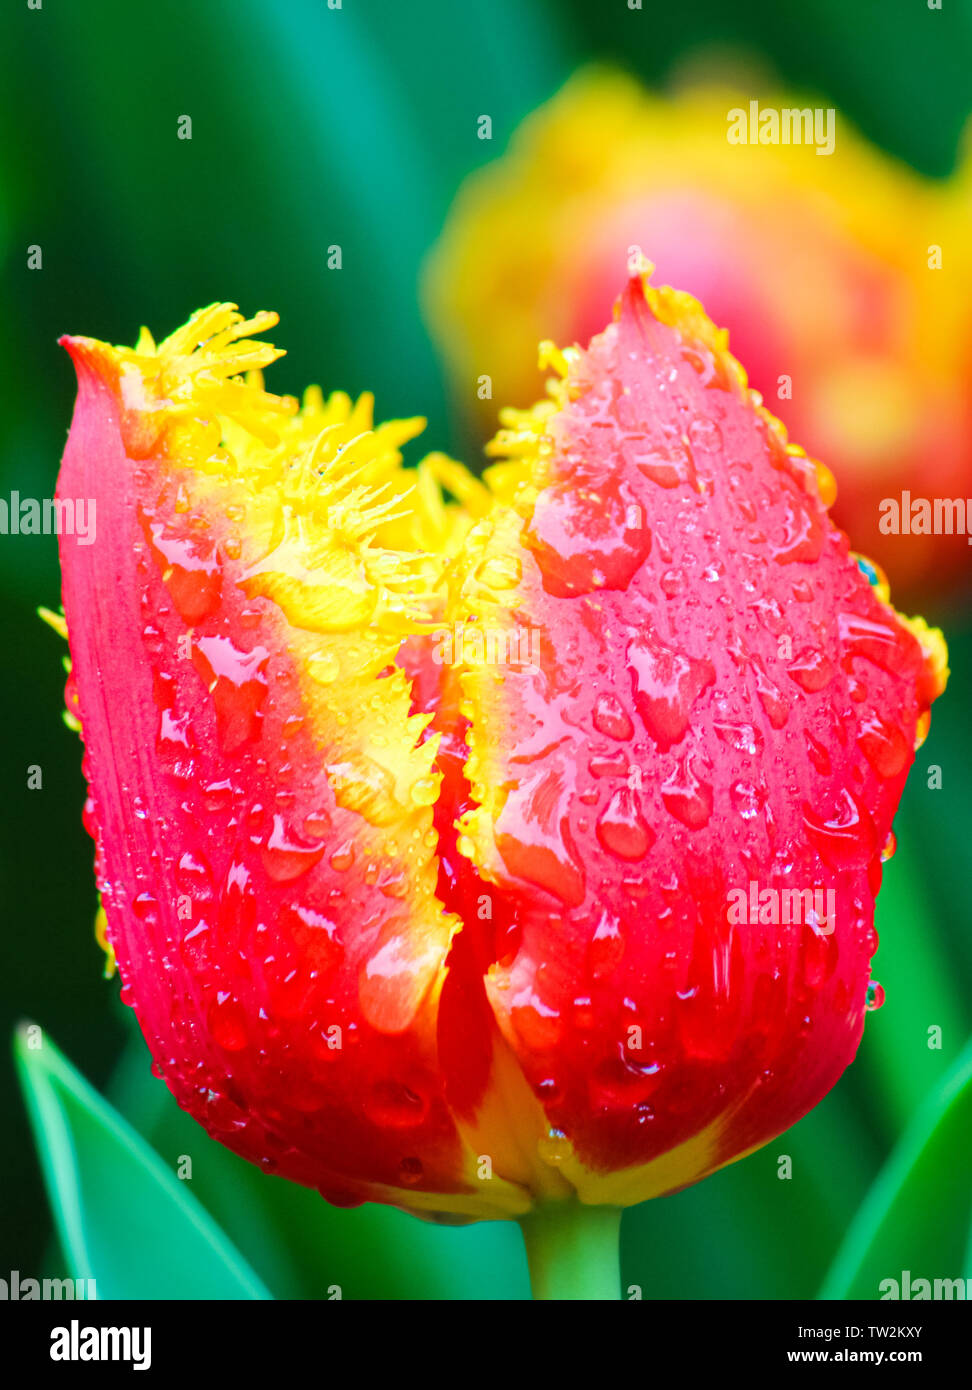 Awesome detail of red yellow tulip flower with rain drops on petals. Blurred green background. Typical flowers for Netherlands. Macro flowers, macro nature. Amazing nature. Stock Photo